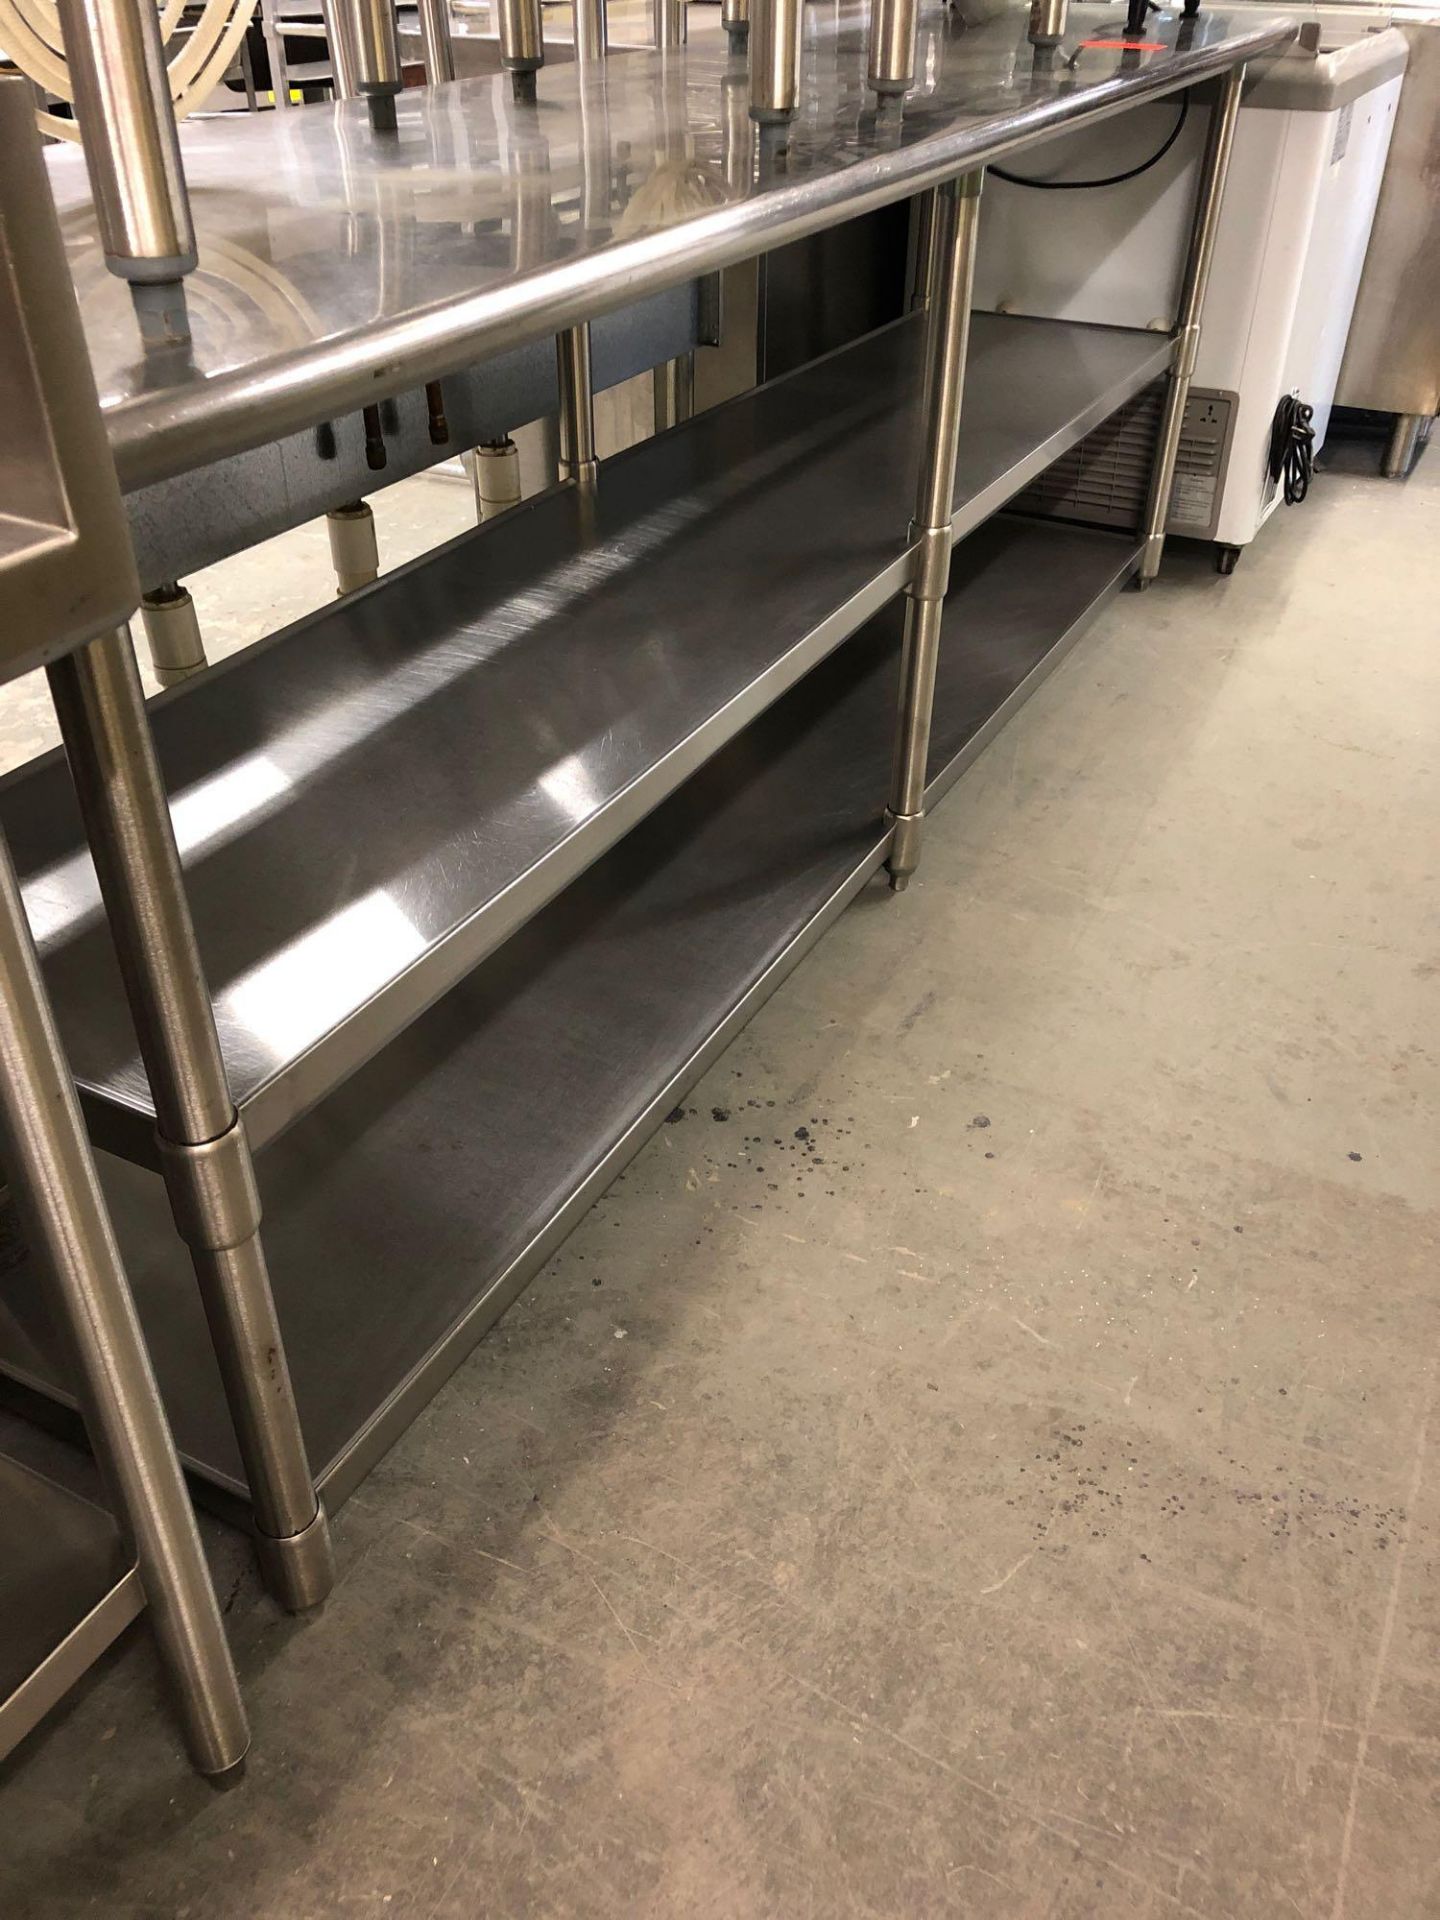 96” x 24” all stainless steel table with two shelves